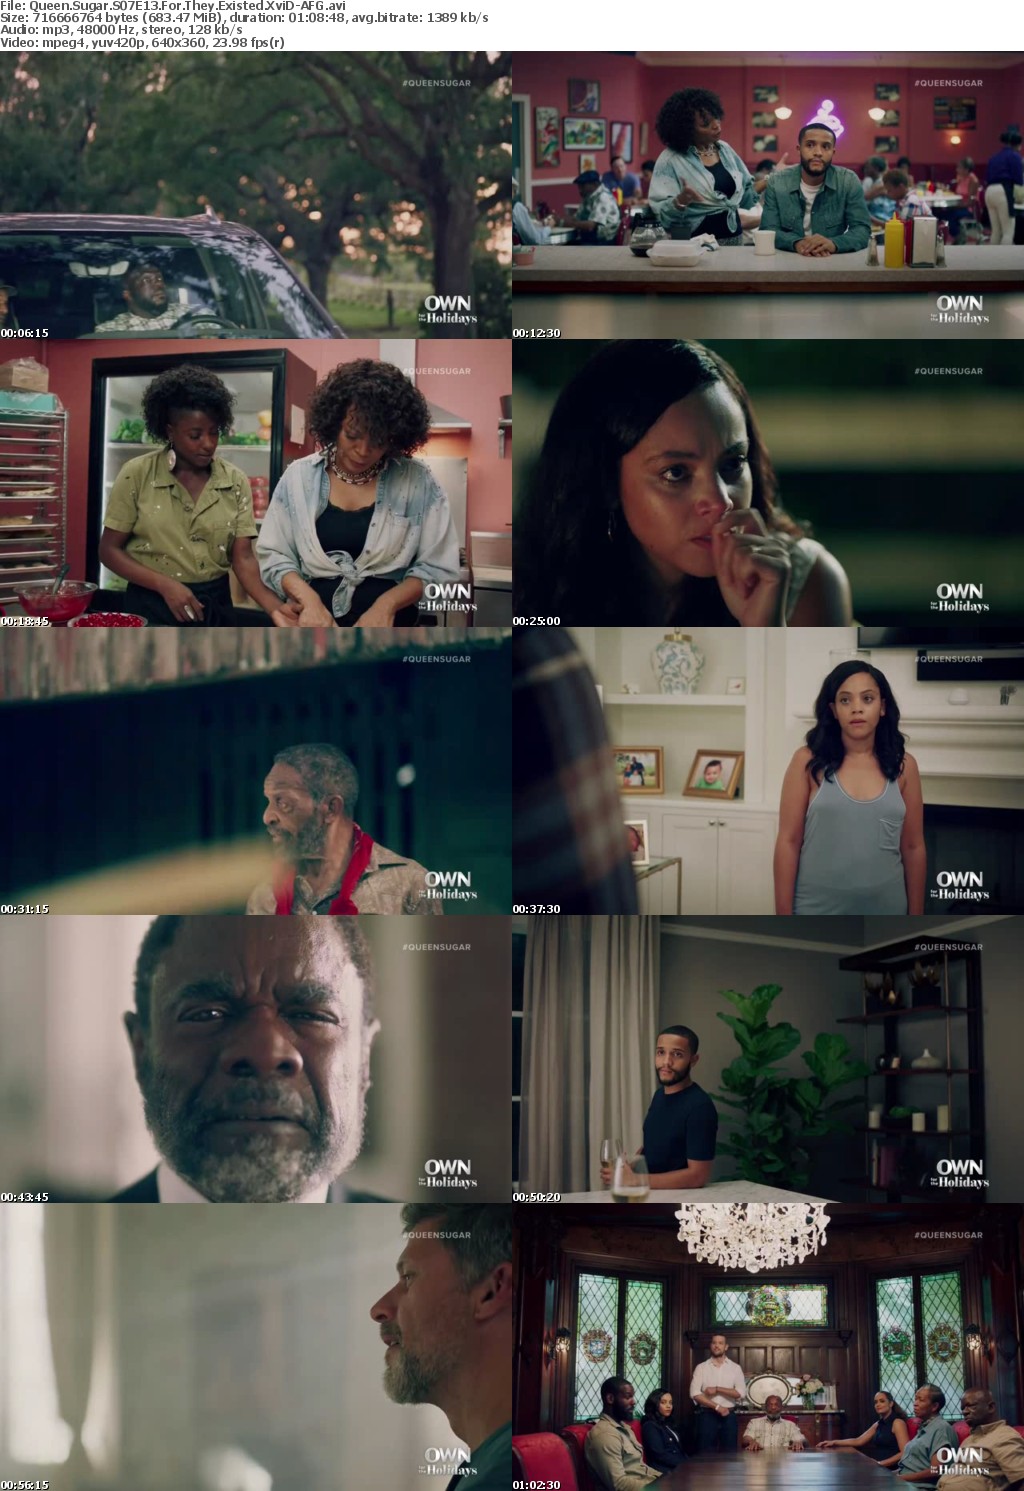 Queen Sugar S07E13 For They Existed XviD-AFG